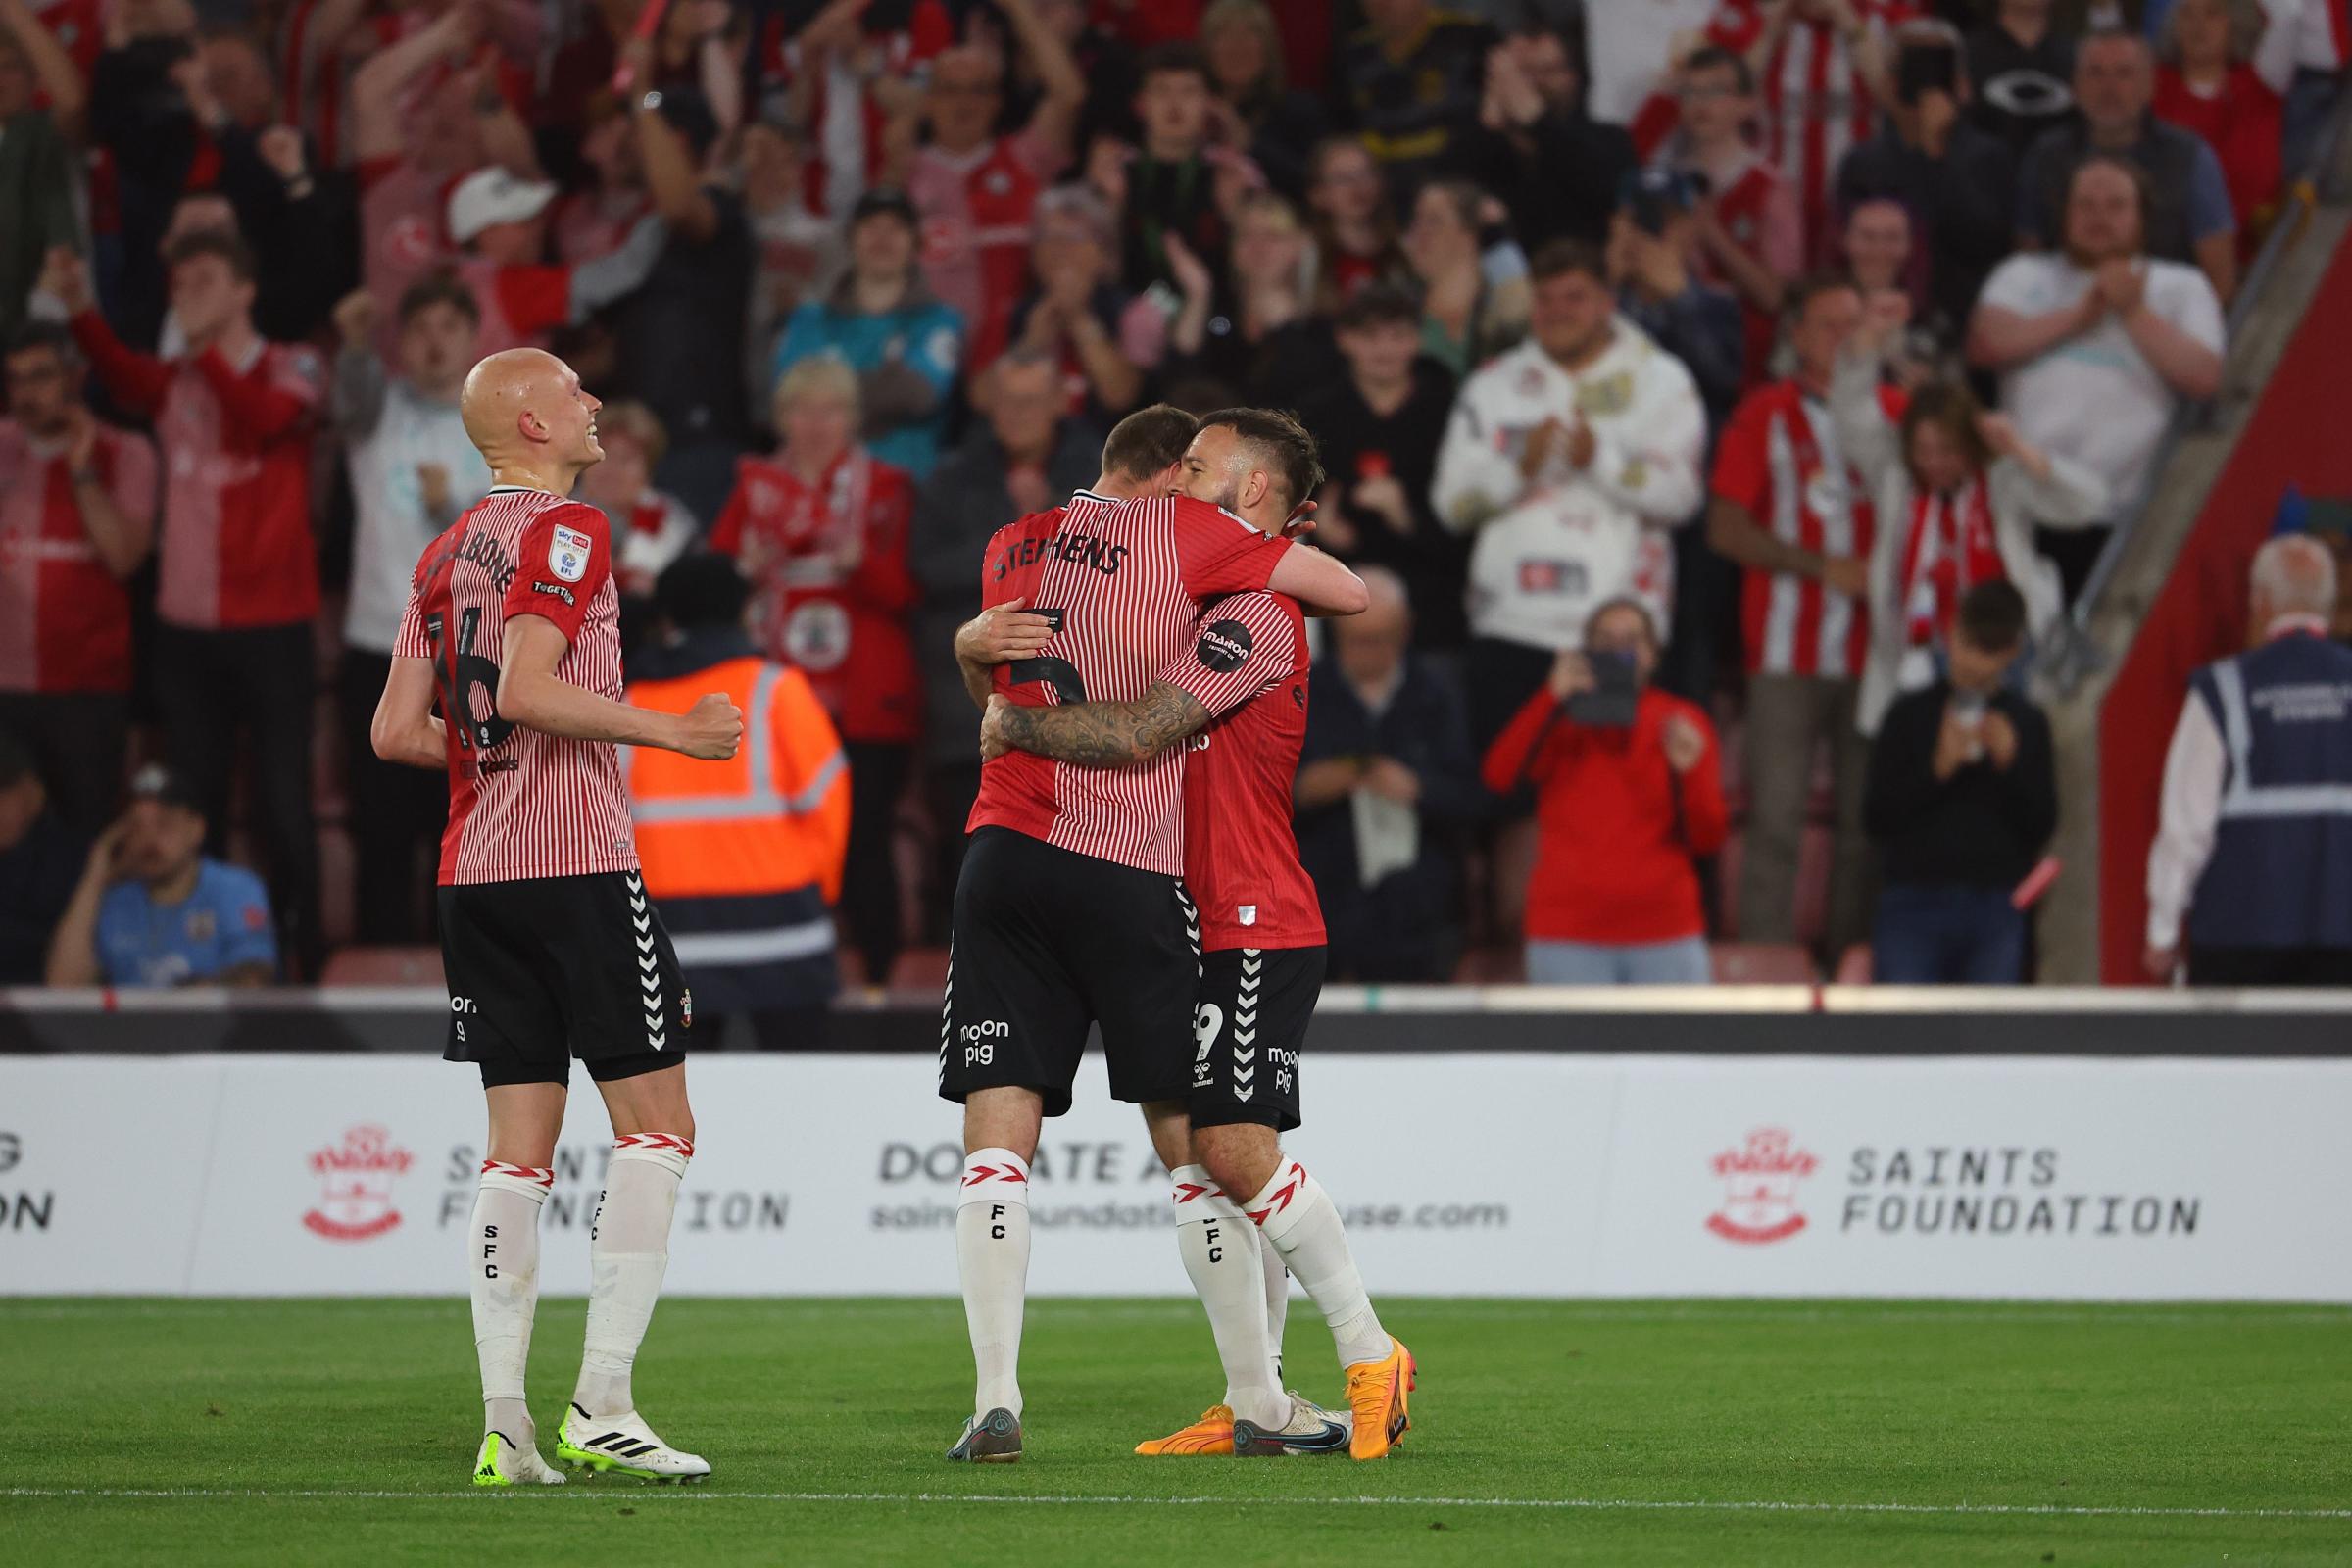 How Southampton players reacted to reaching playoff final